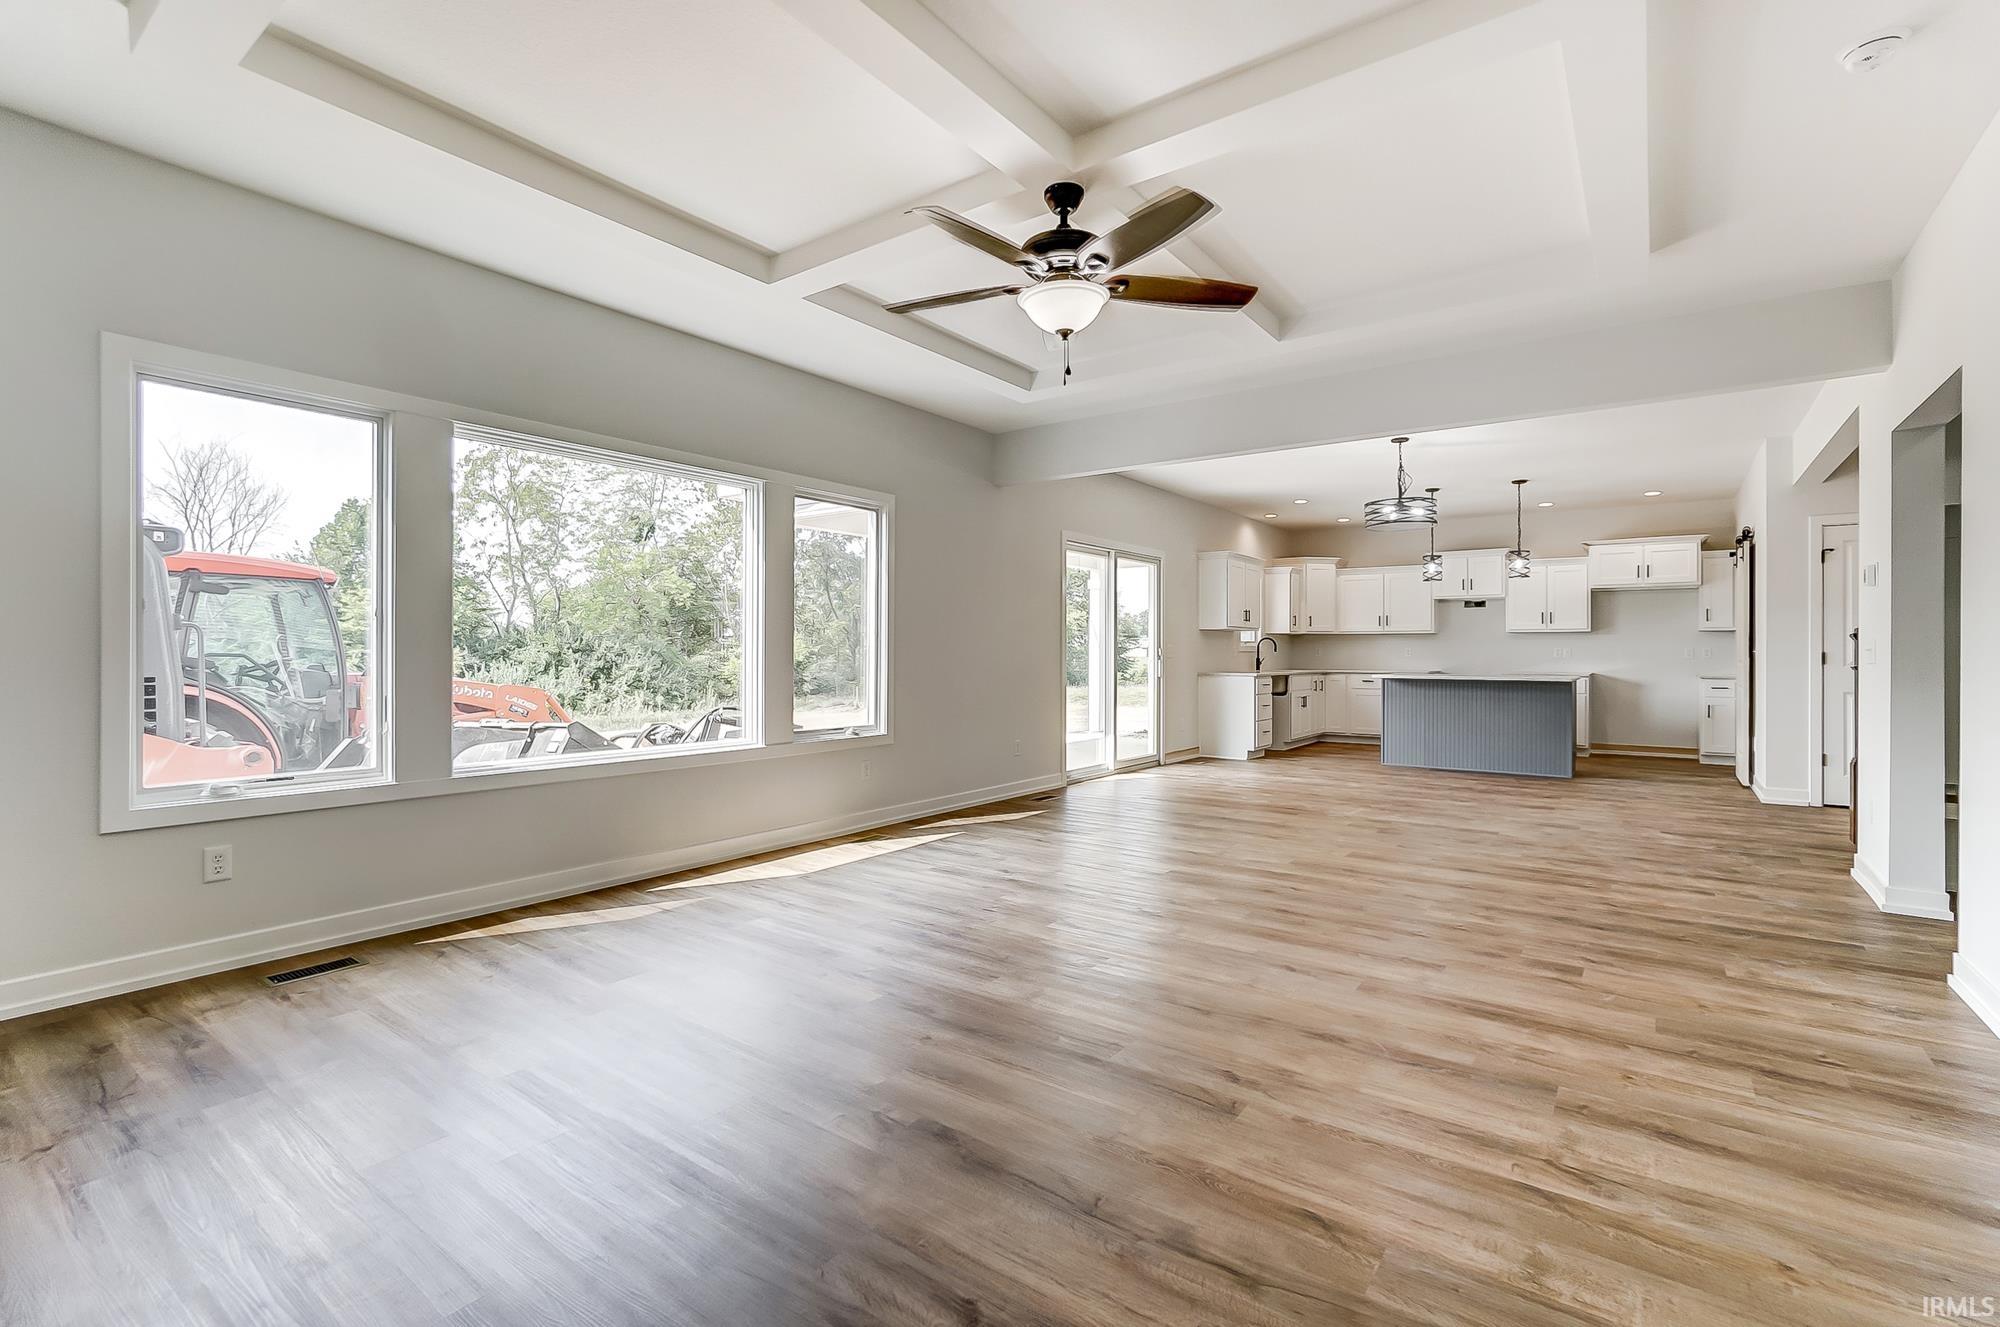 Picture from another home with the similar floor plan.